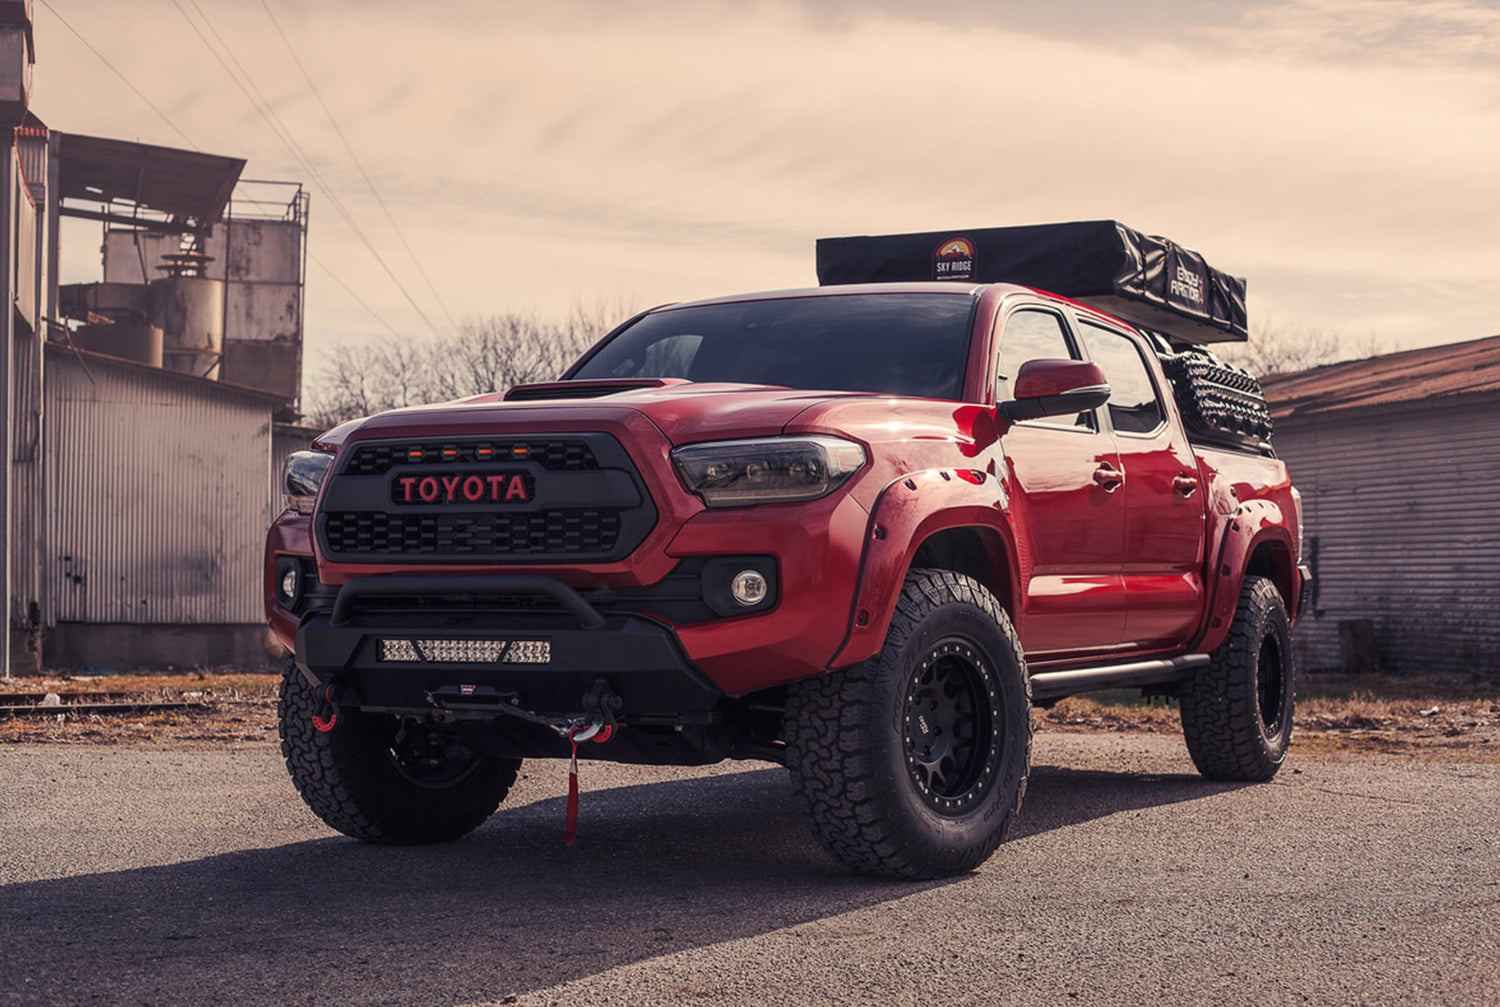 7 Accessories For Your Toyota Tacoma